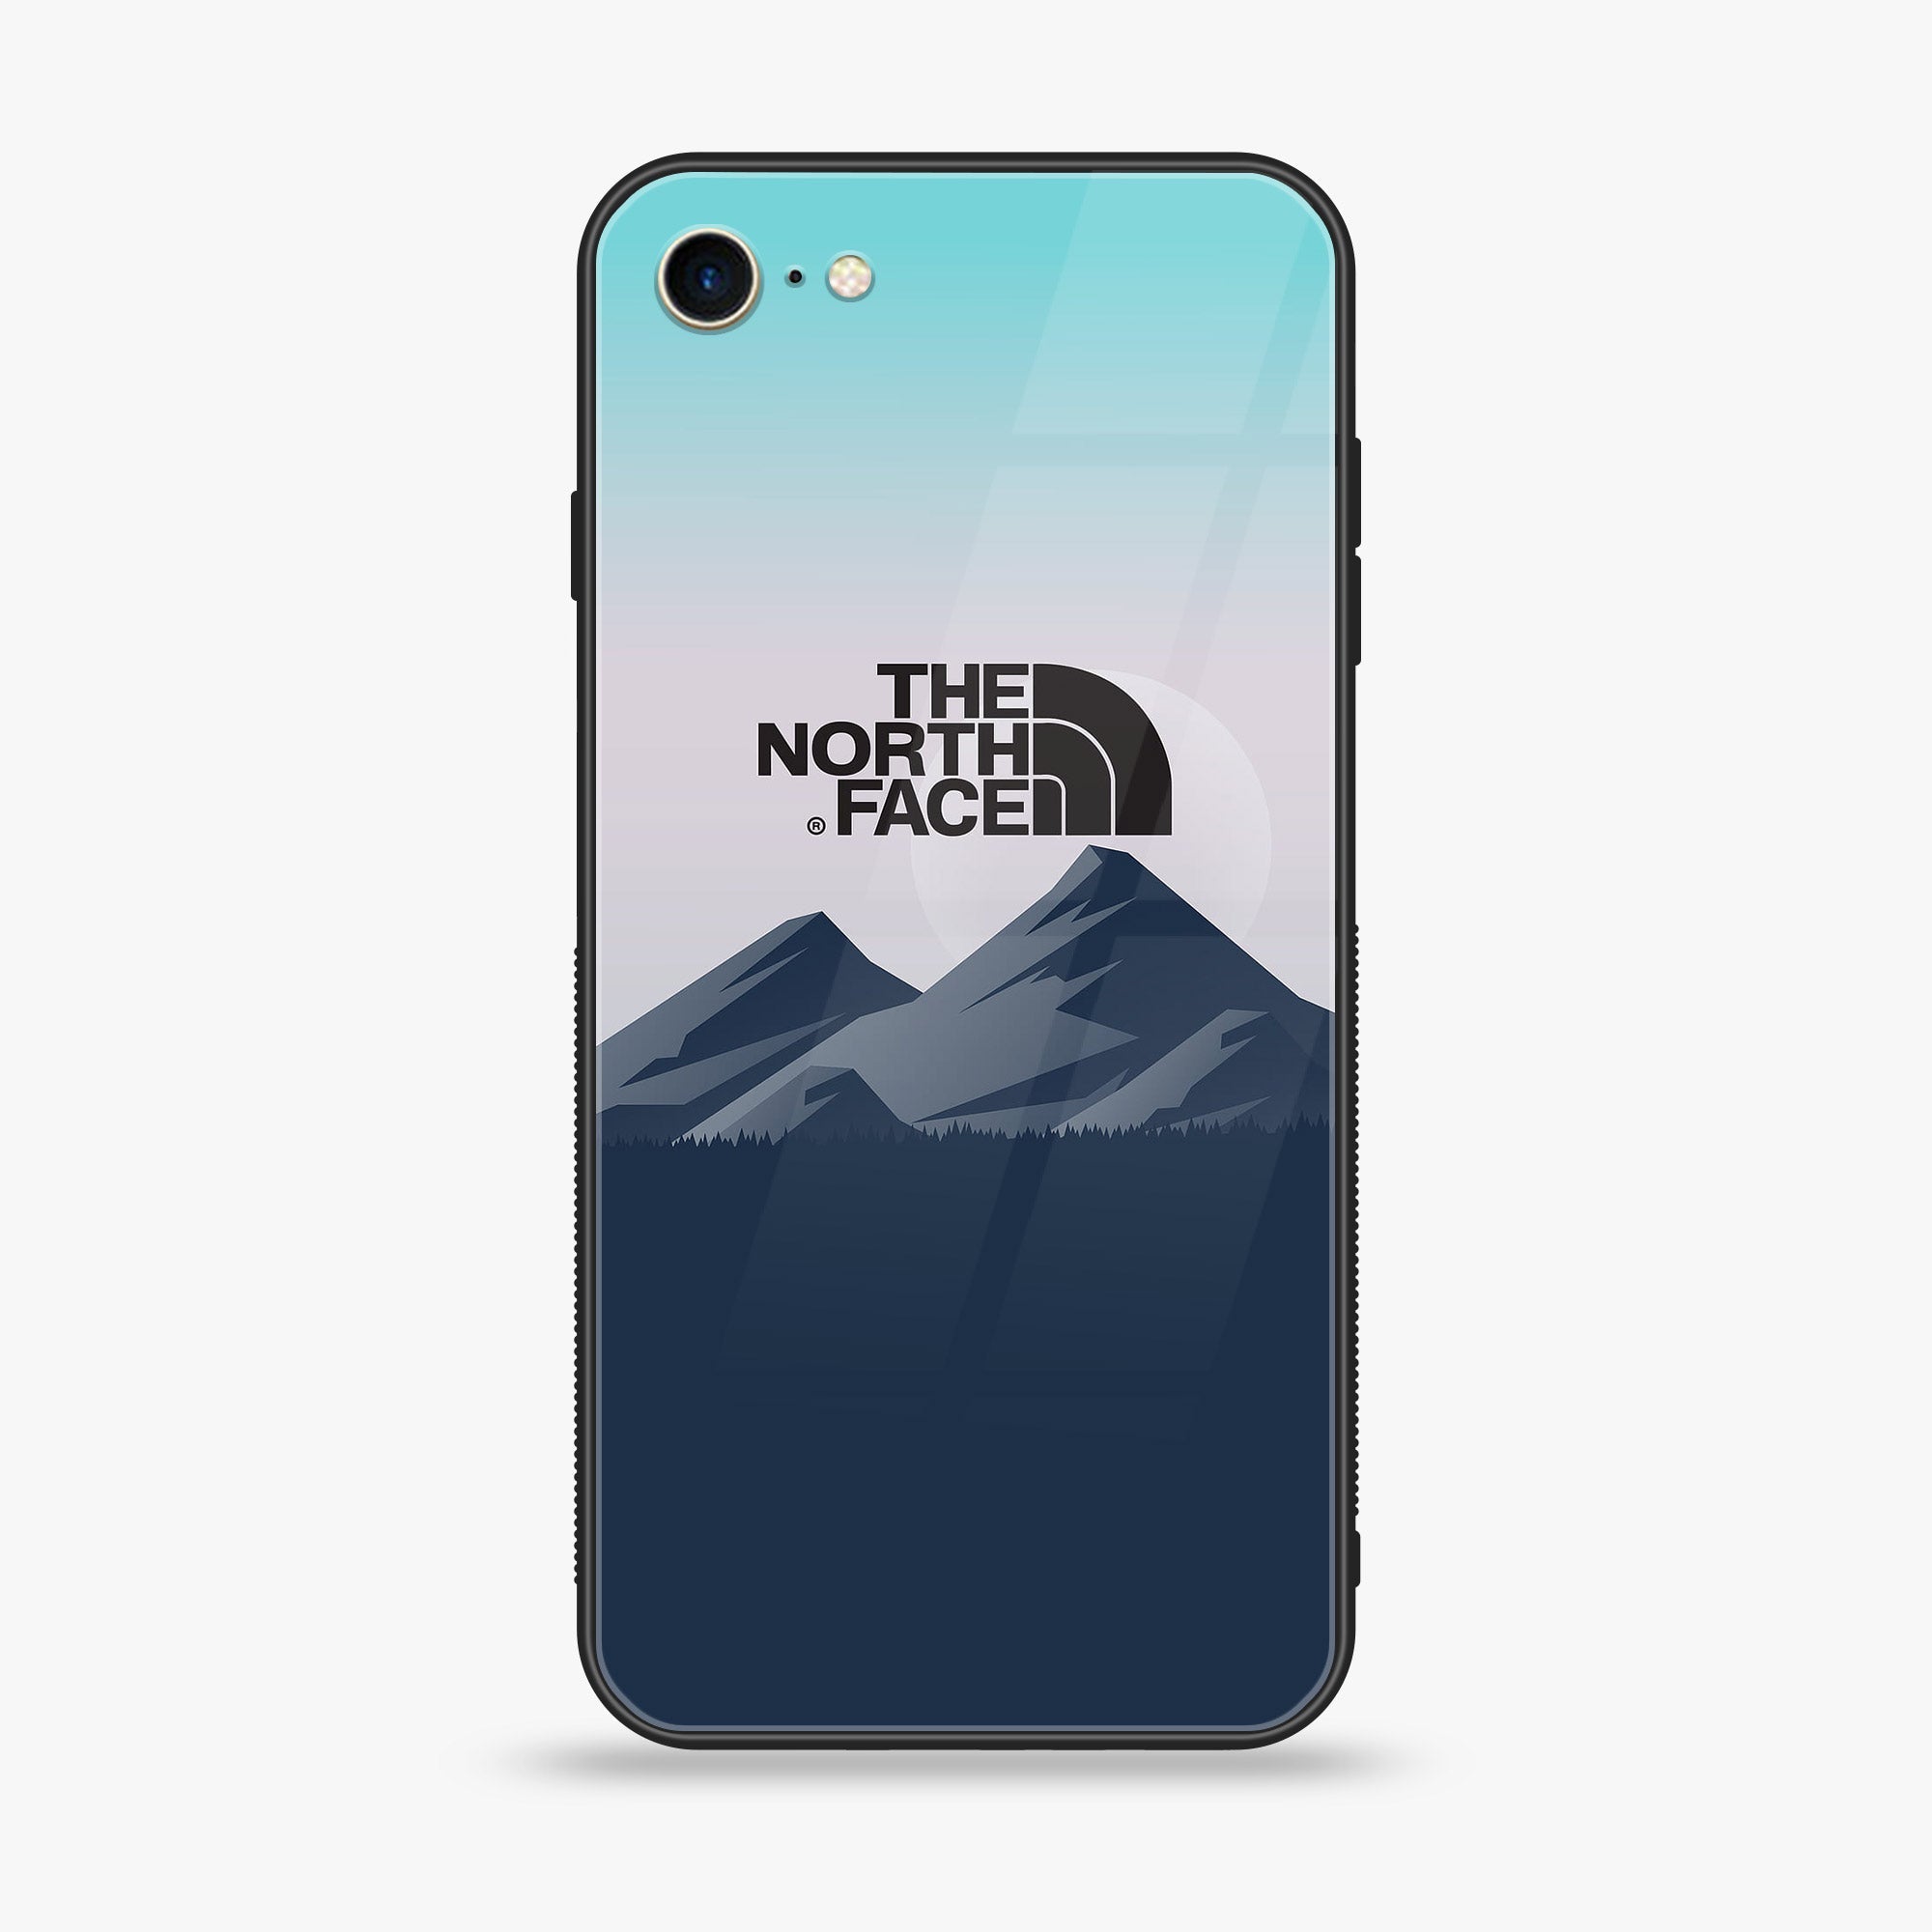 iPhone 6 - The North Face Series - Premium Printed Glass soft Bumper shock Proof Case